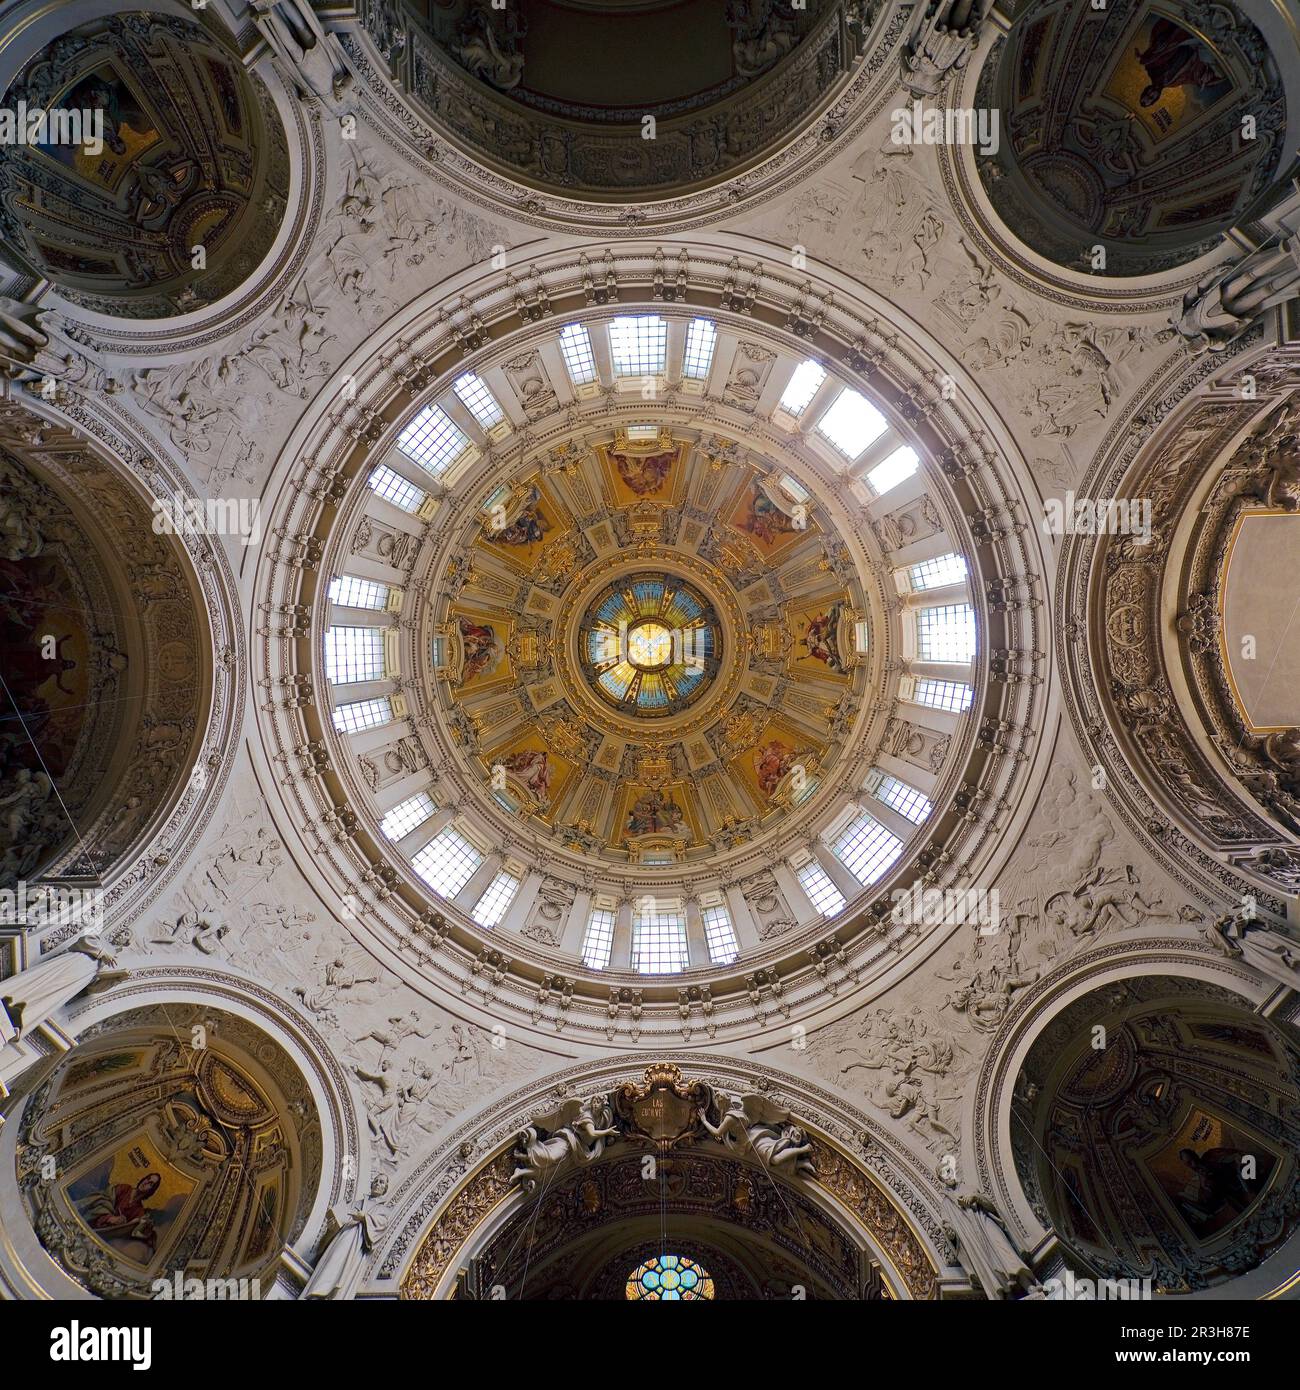 Looking up into the dome with central Holy Spirit window with dome windows, Berlin Cathedral Germany Stock Photo